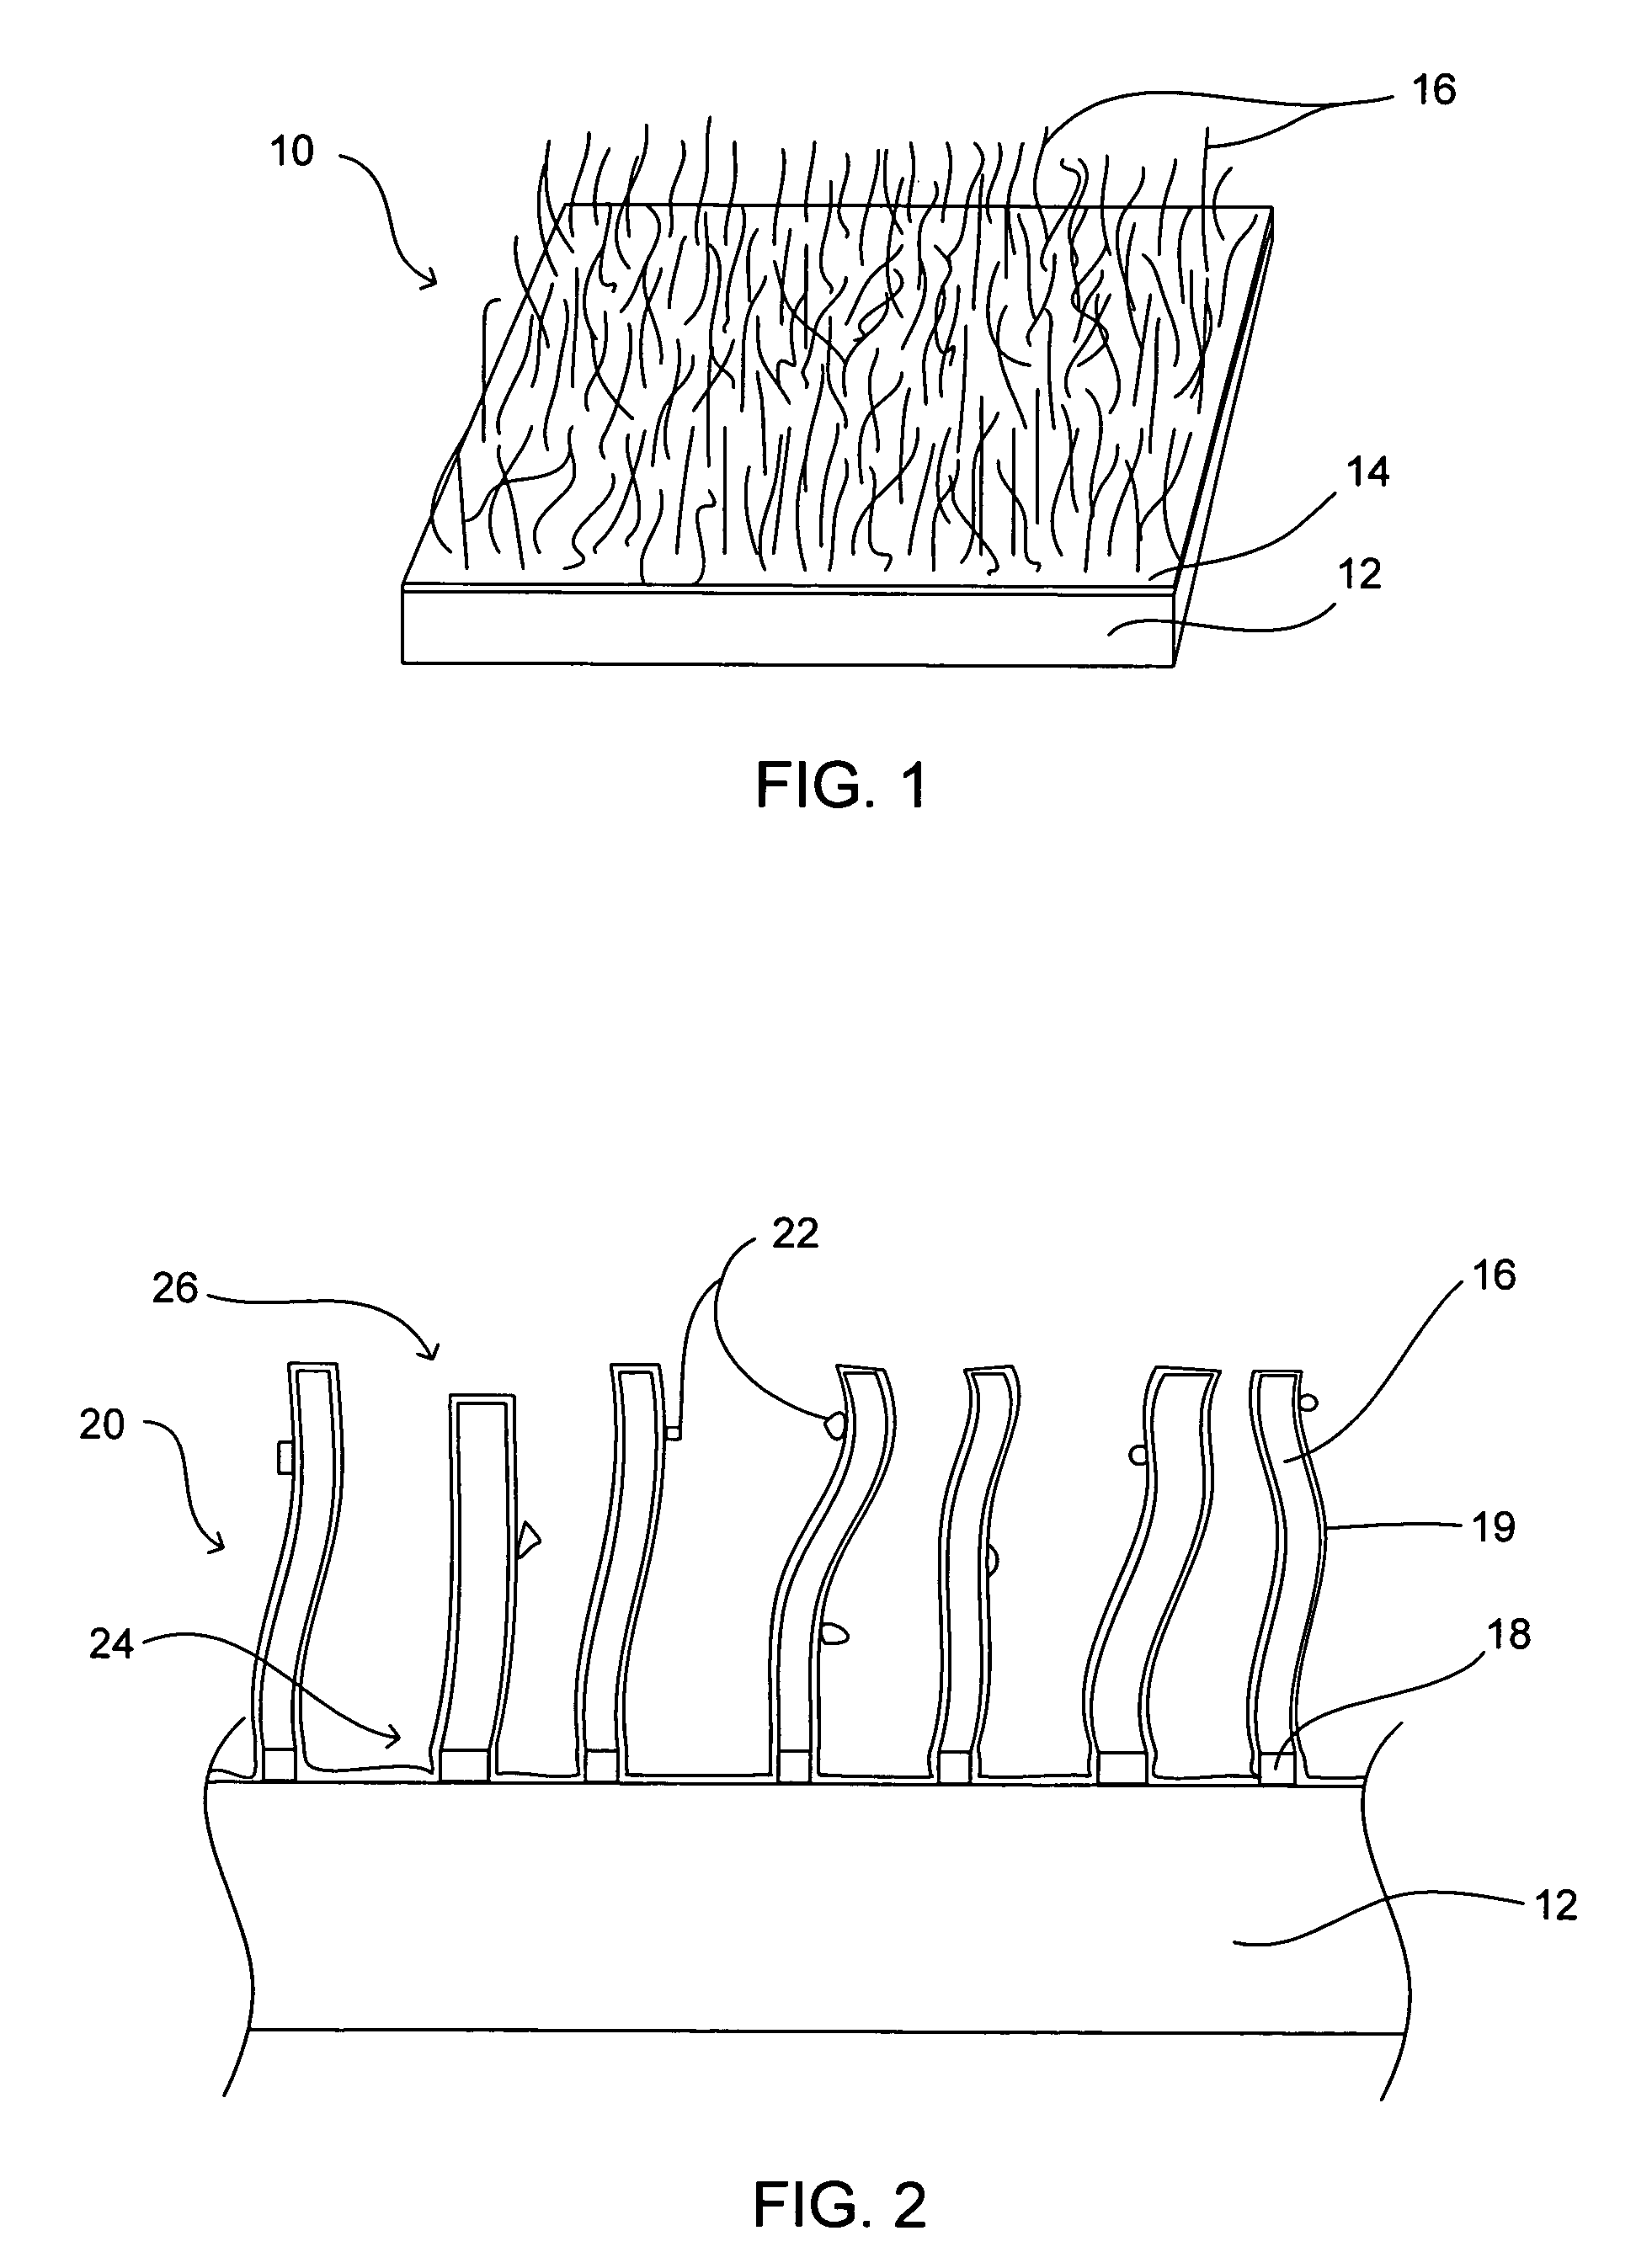 Free-standing nanowire sensor and method for detecting an analyte in a fluid